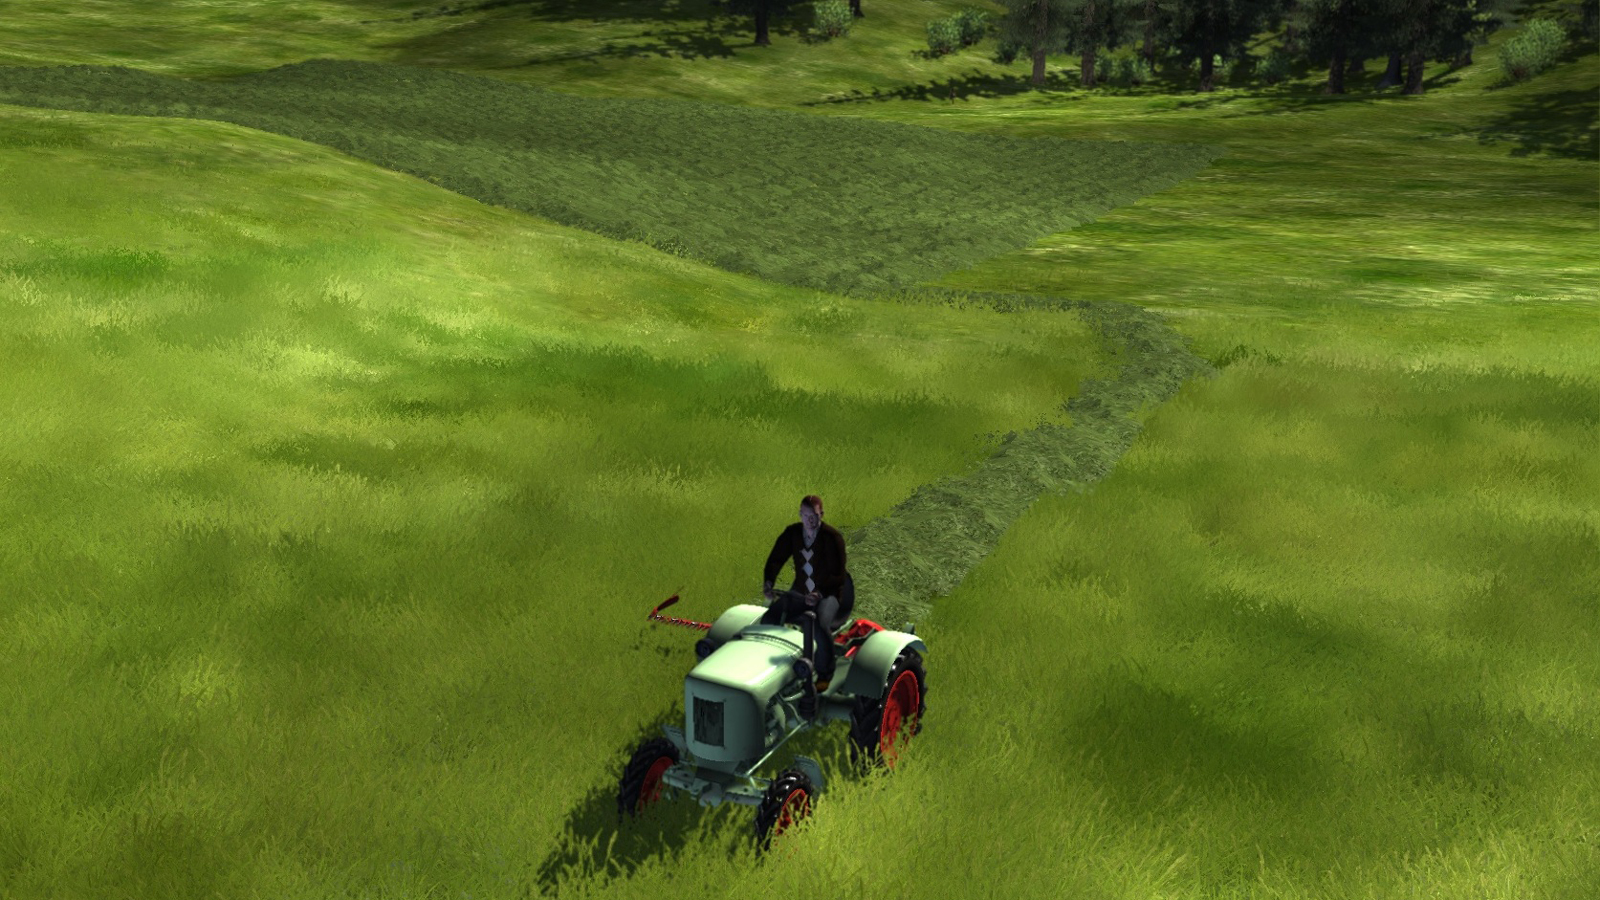 download agricultural simulator 2013 for free